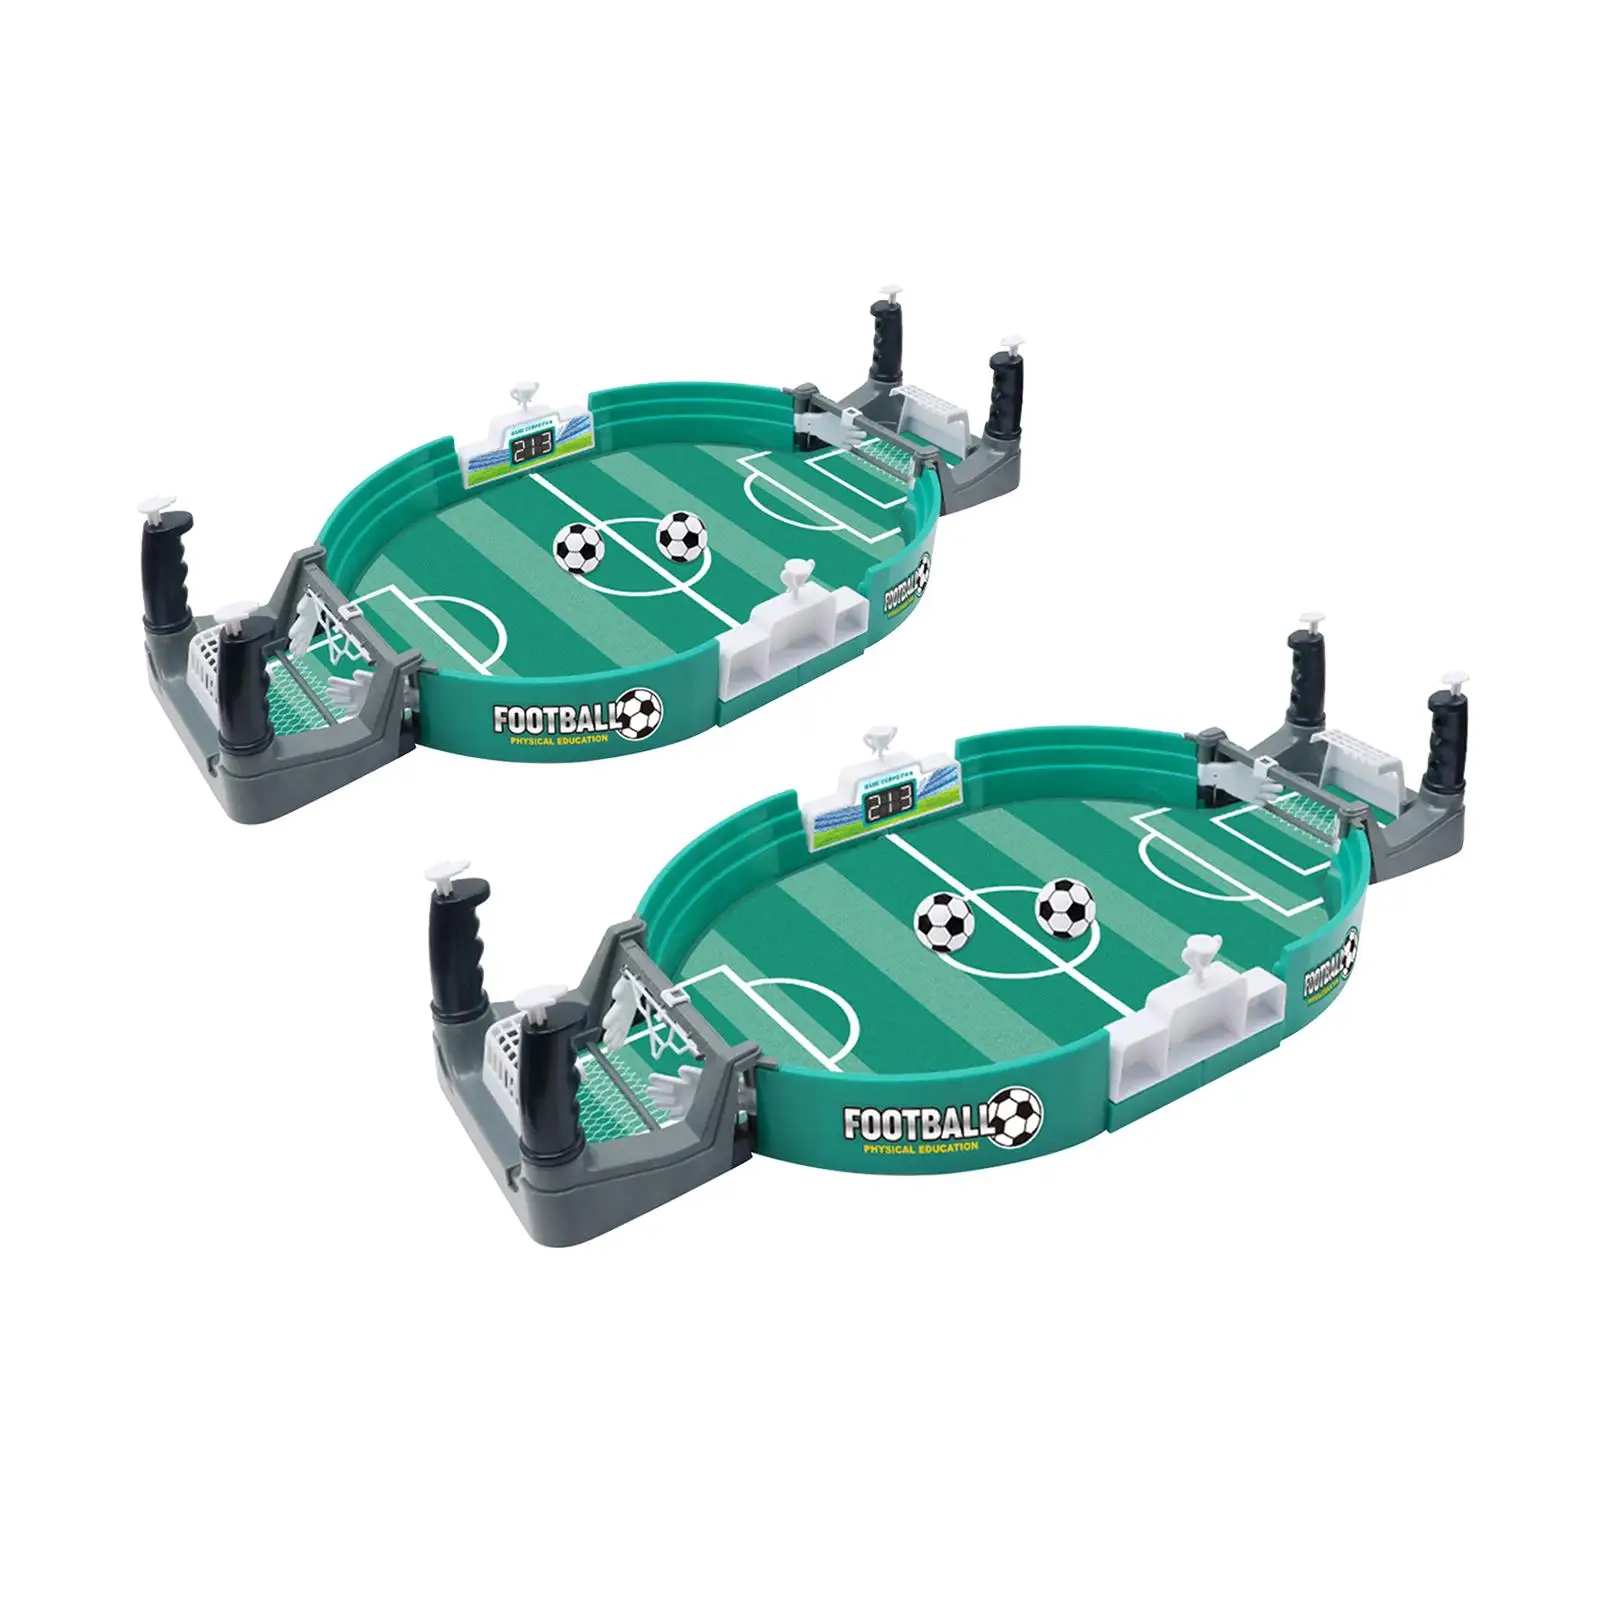 Football Board Sport Game Mini Tabletop Football for Family Game Entertainment Party